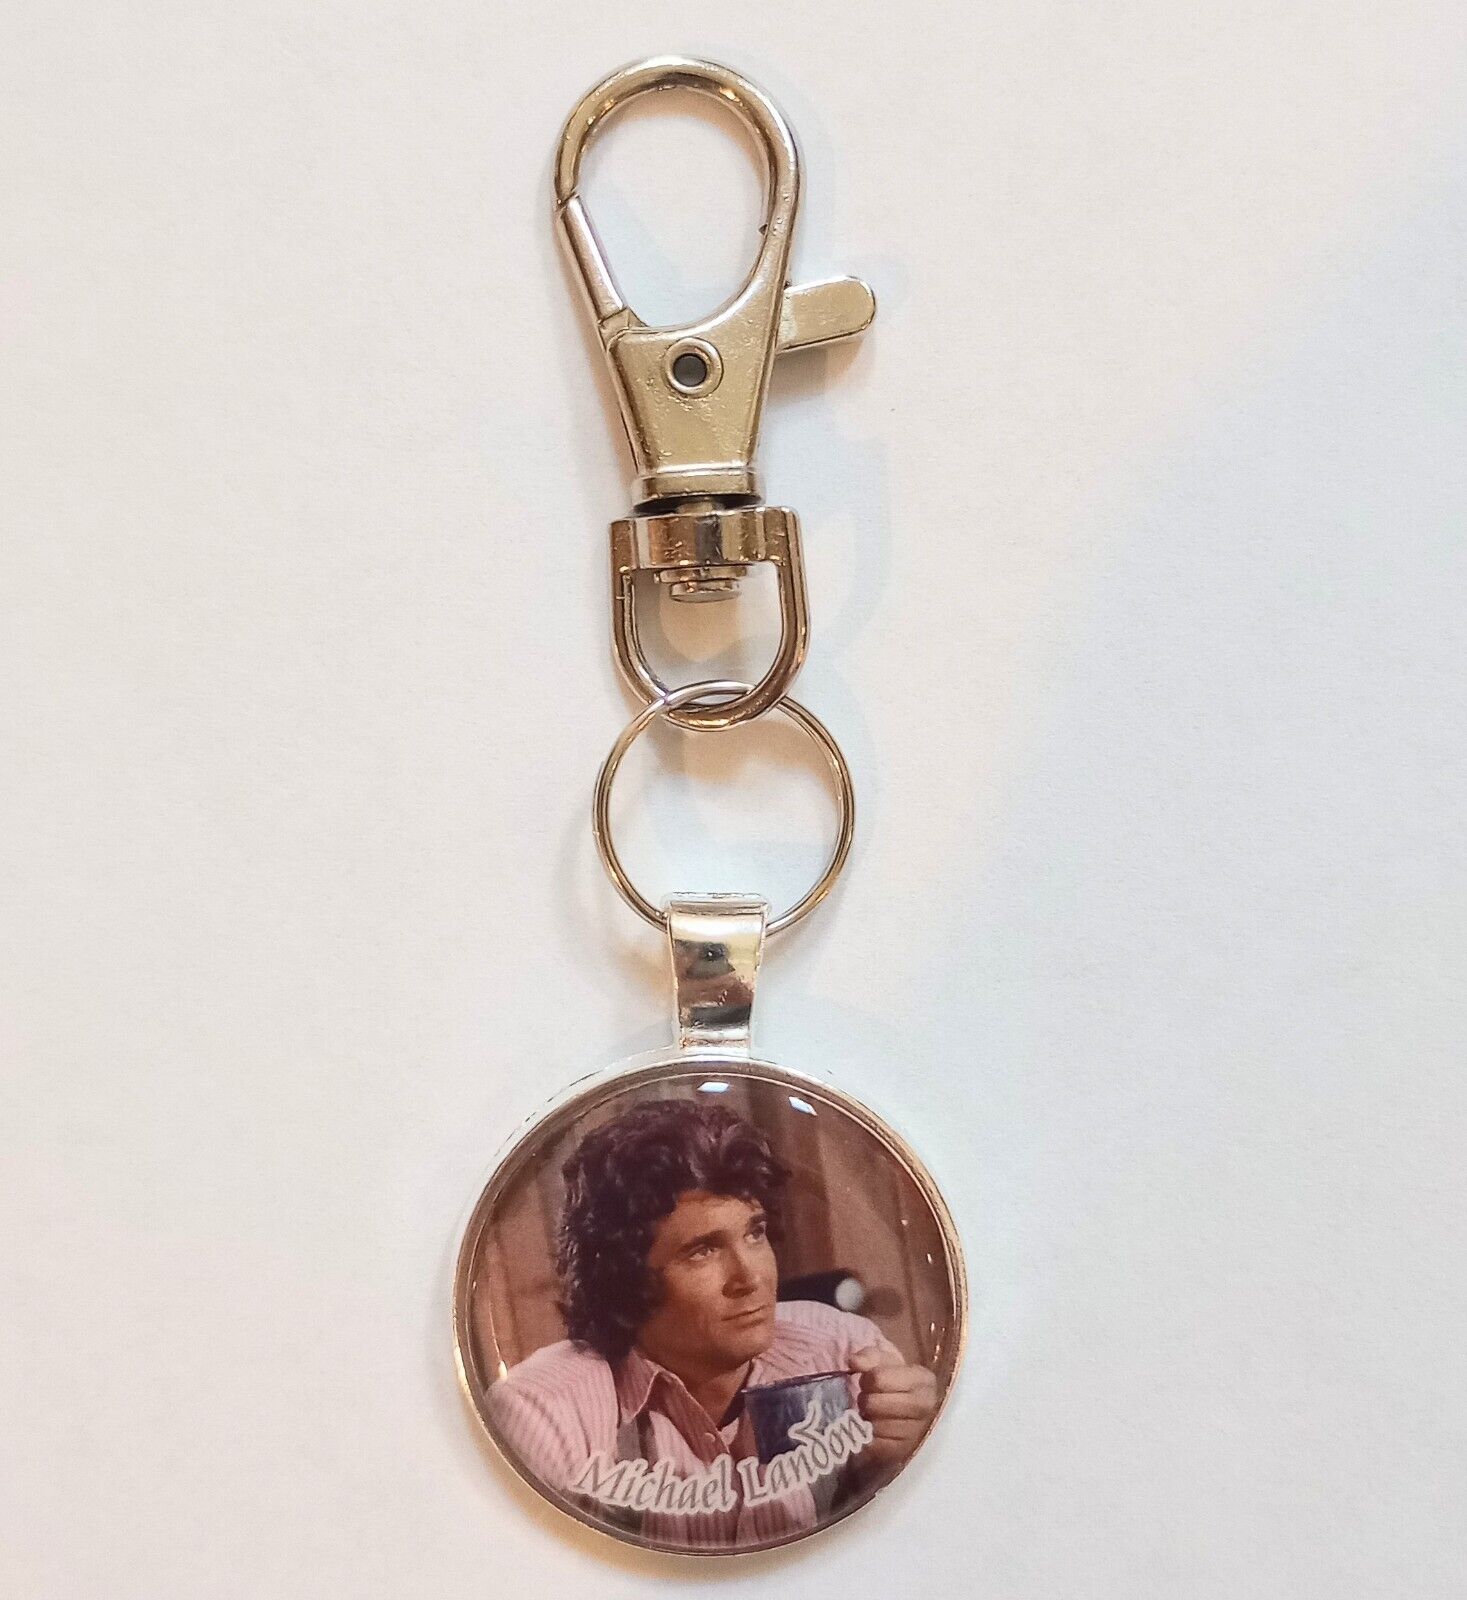 Little House On The Prairie Keychain (Michael Landon As Charles Ingalls)💕